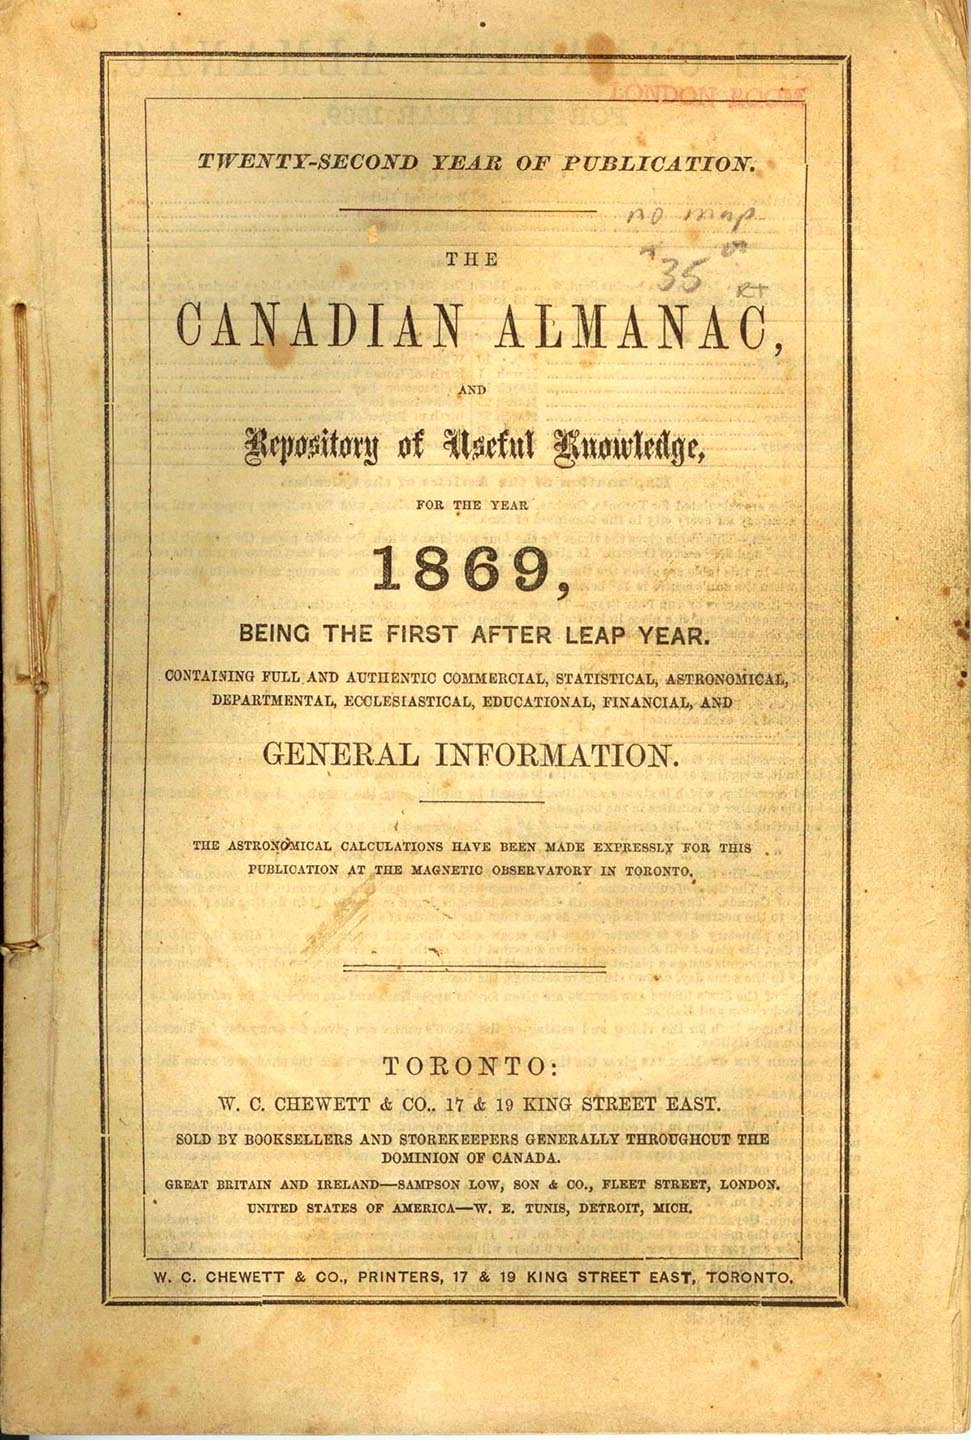 The Canadian Almanac, and Repository of Useful Knowledge for the Year 1869